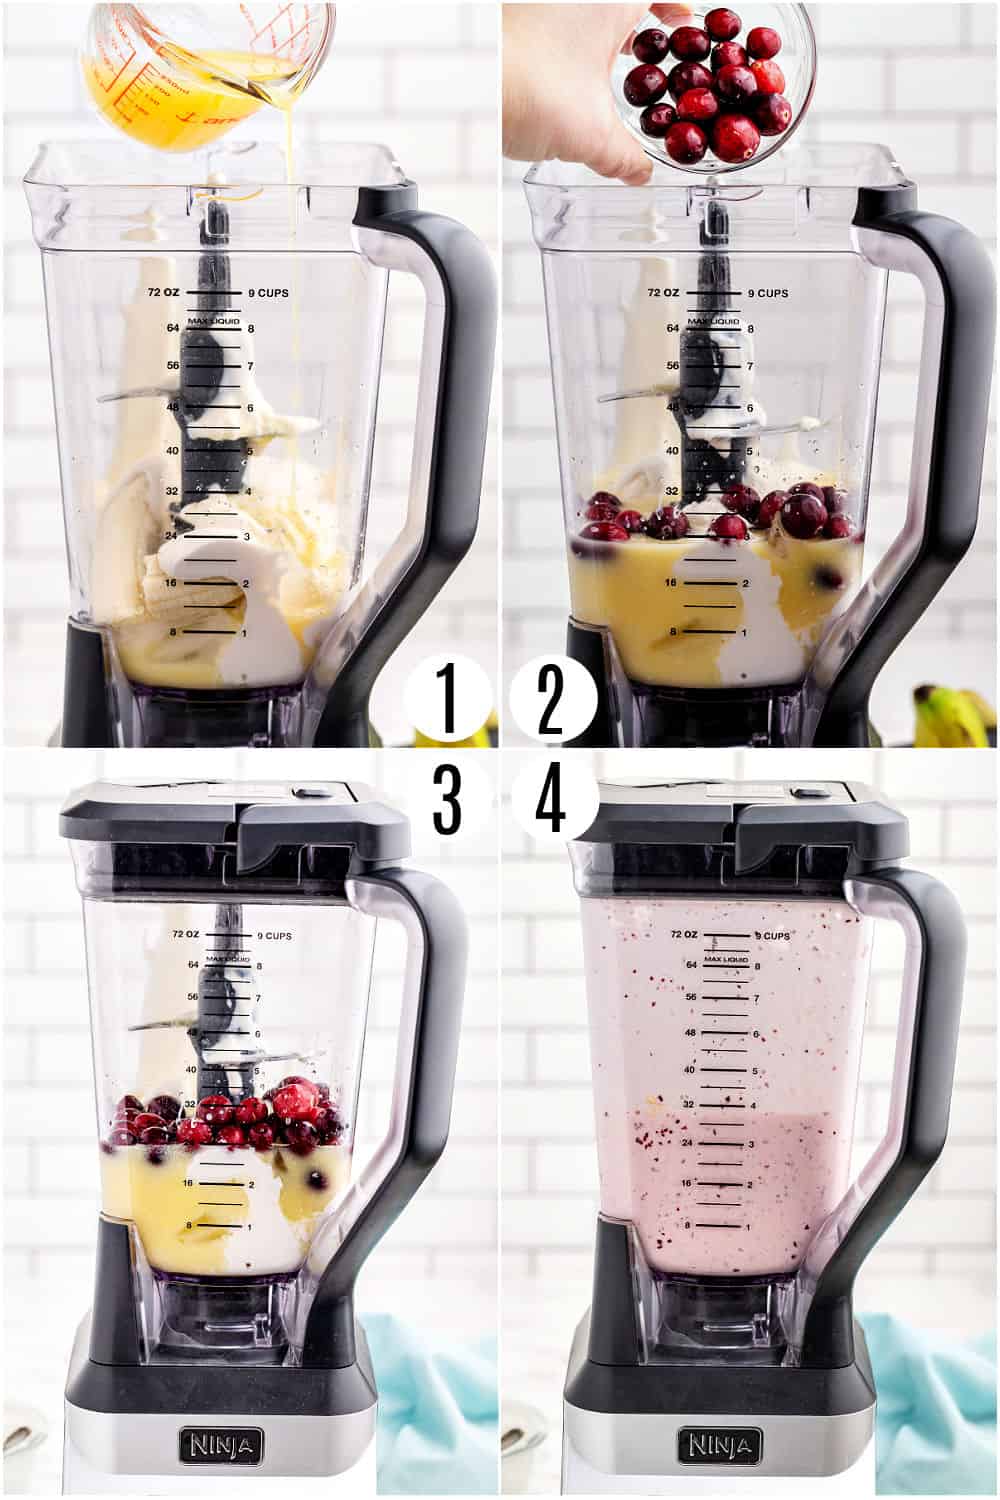 Step by step photos showing how to make a smoothie.